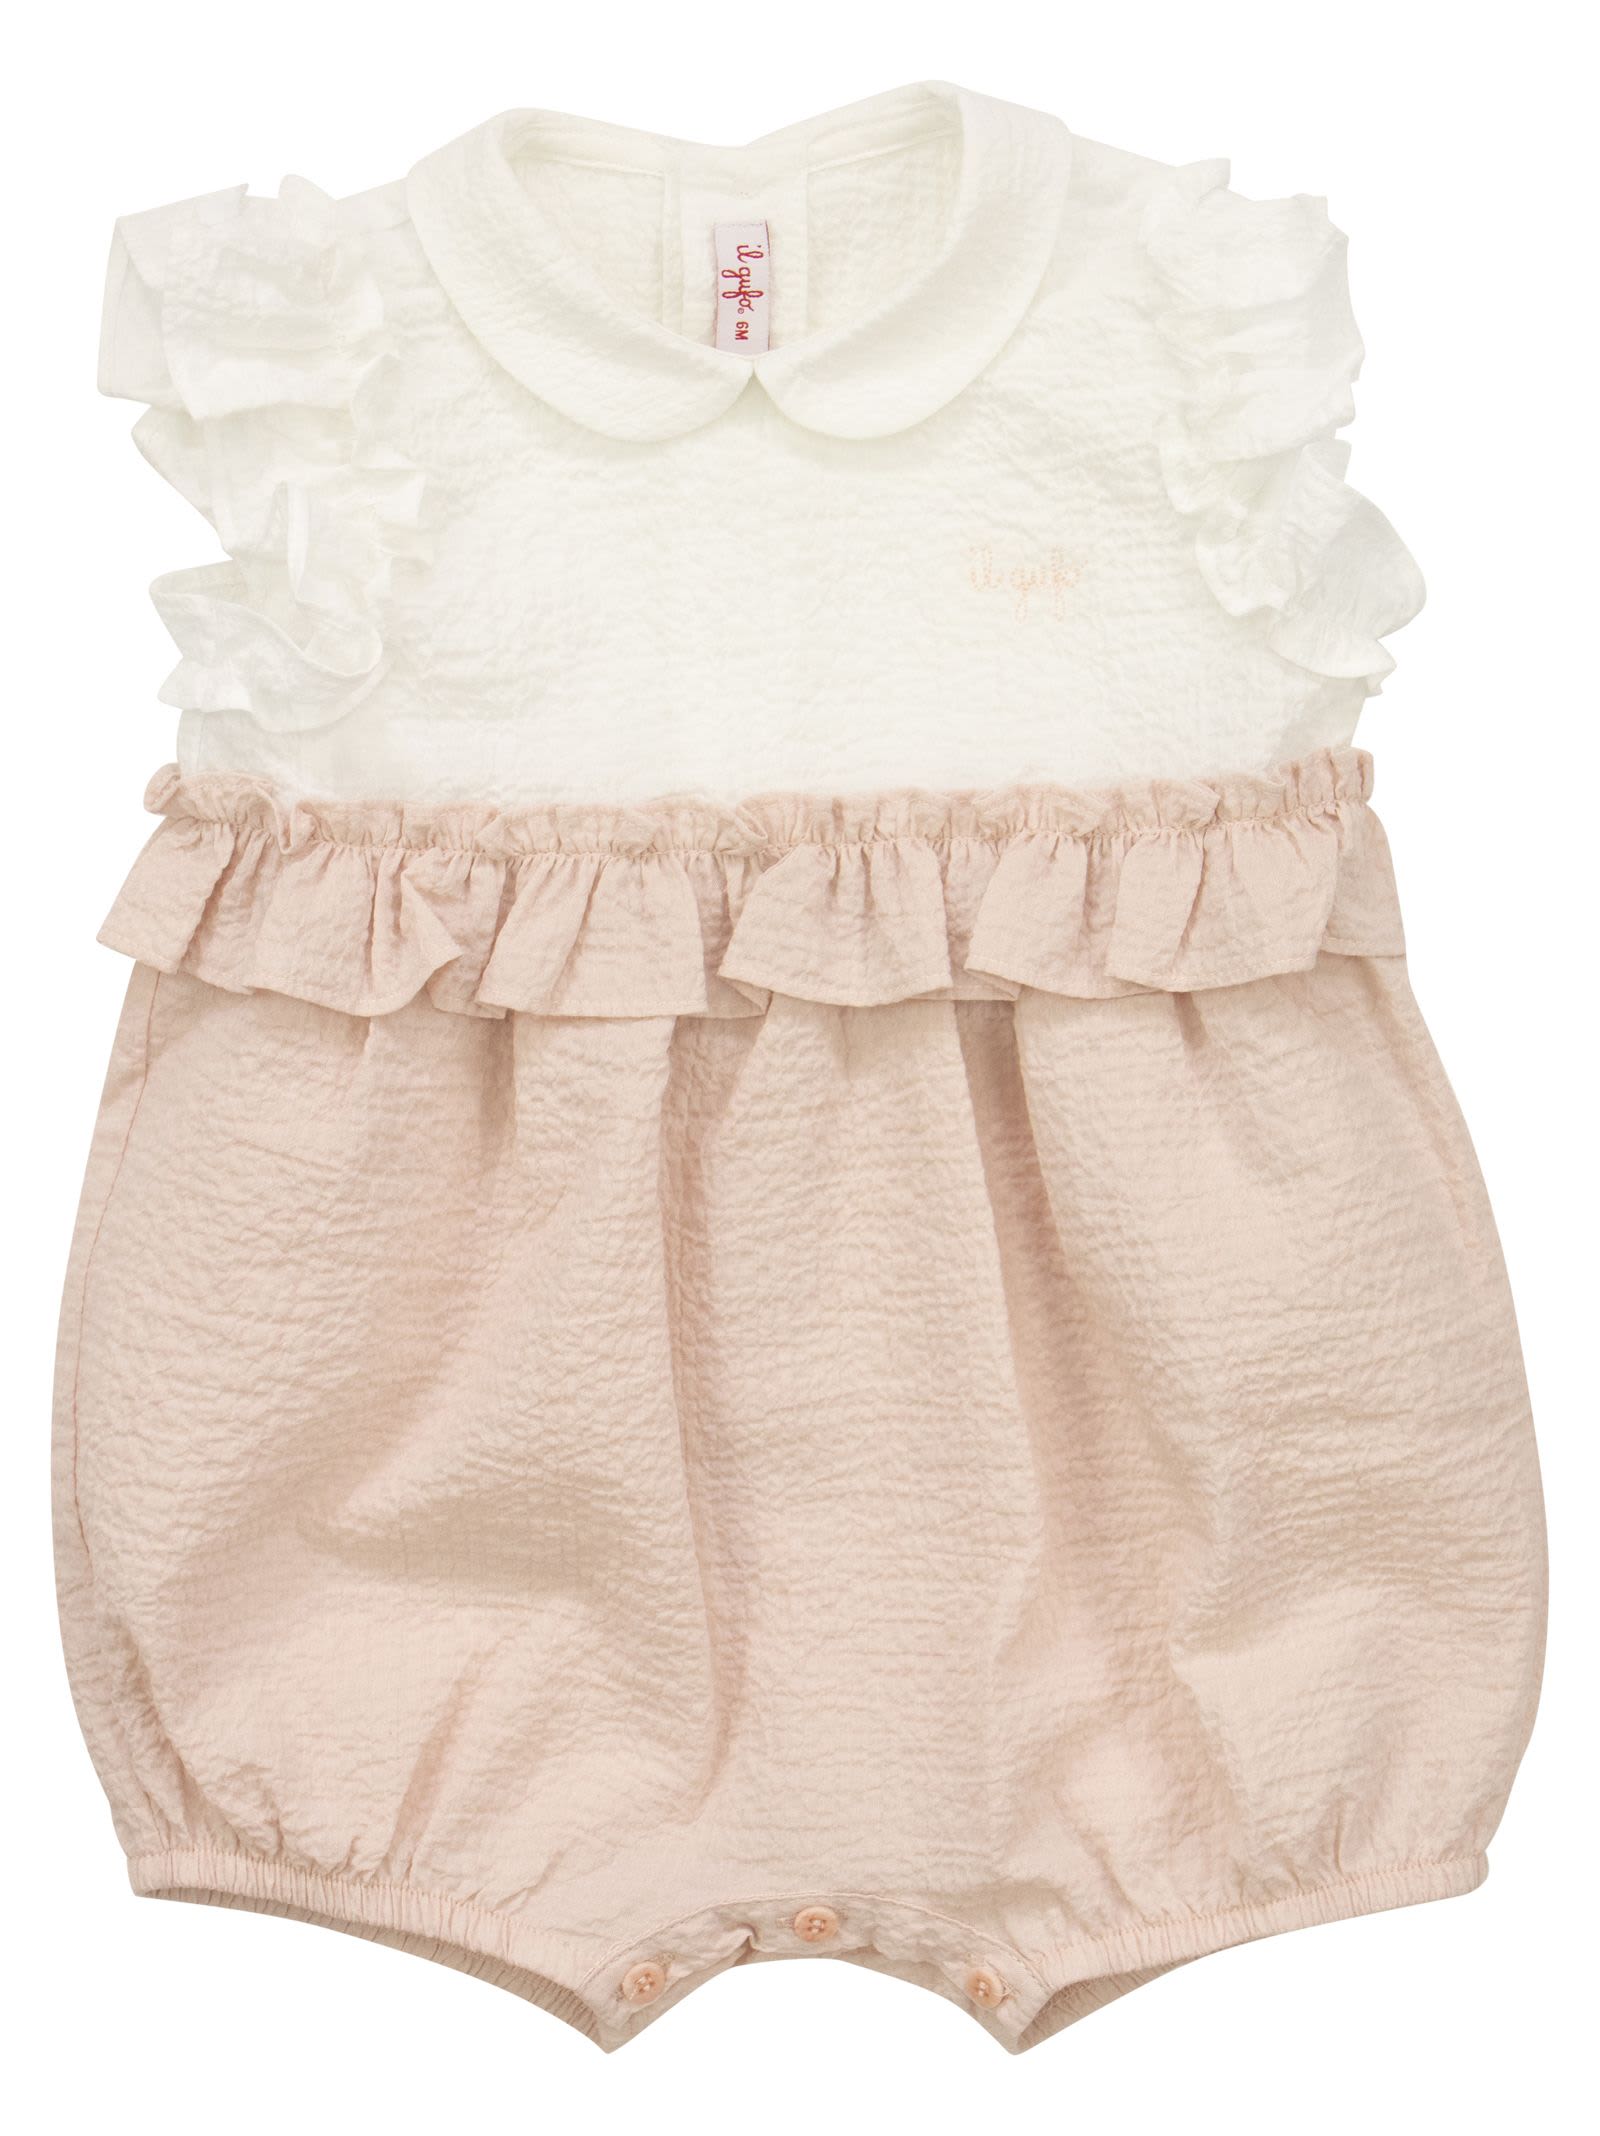 Il Gufo Babies' Cotton Romper With Ruffles In White/pink